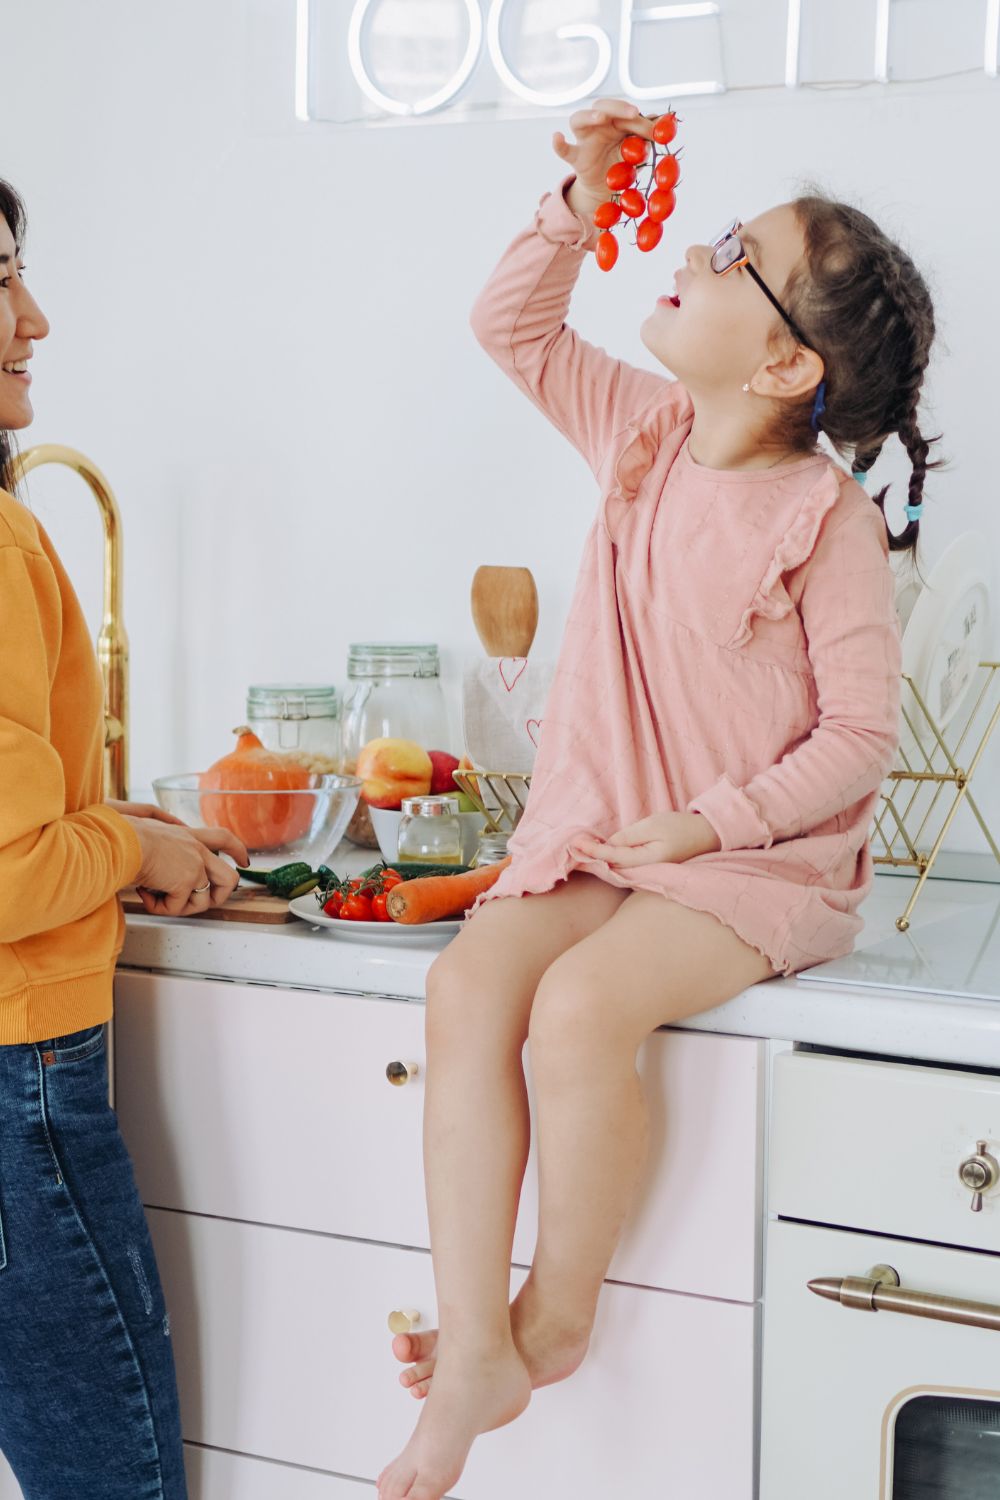 Exploring Fun Ways to Teach Kids About Healthy Eating